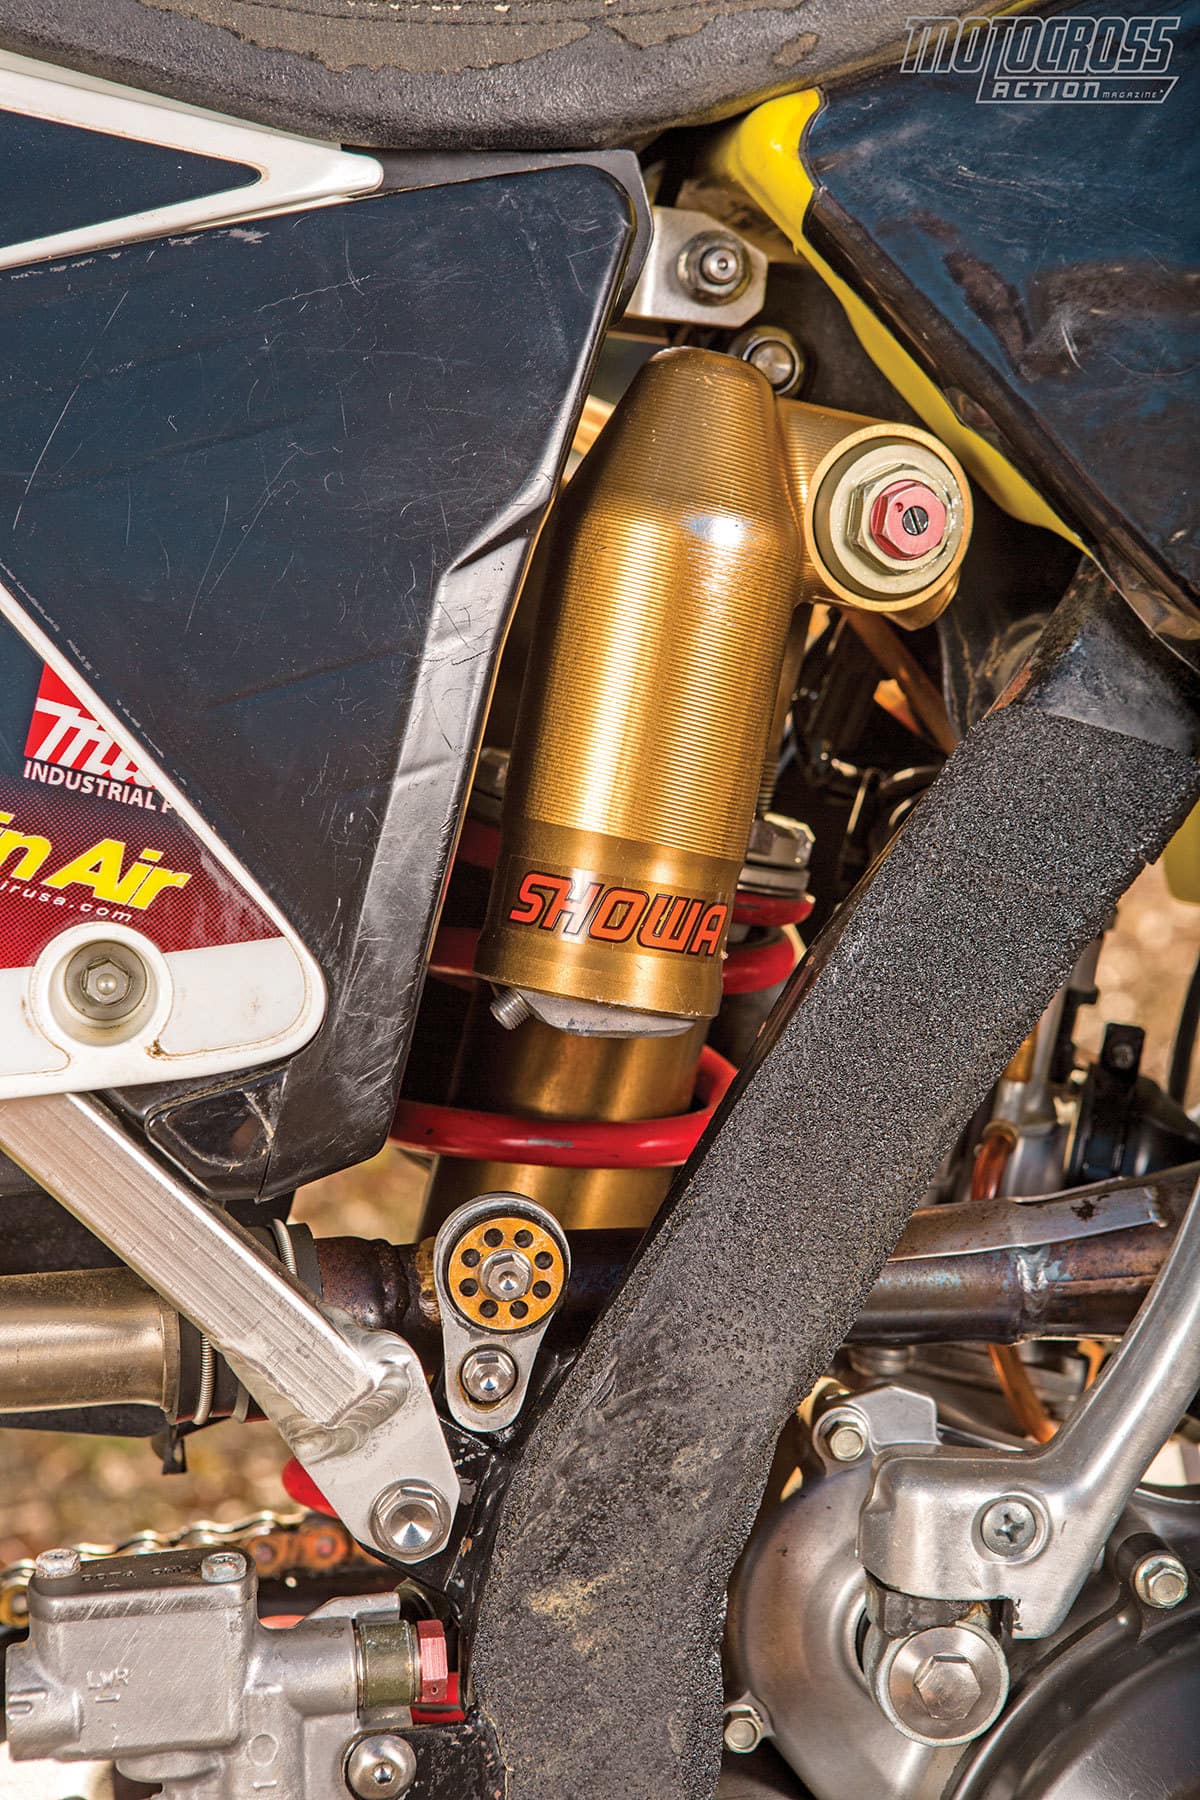 Ricky’s leathers wore a section of gold coating from the works Showa shock. It still shines.